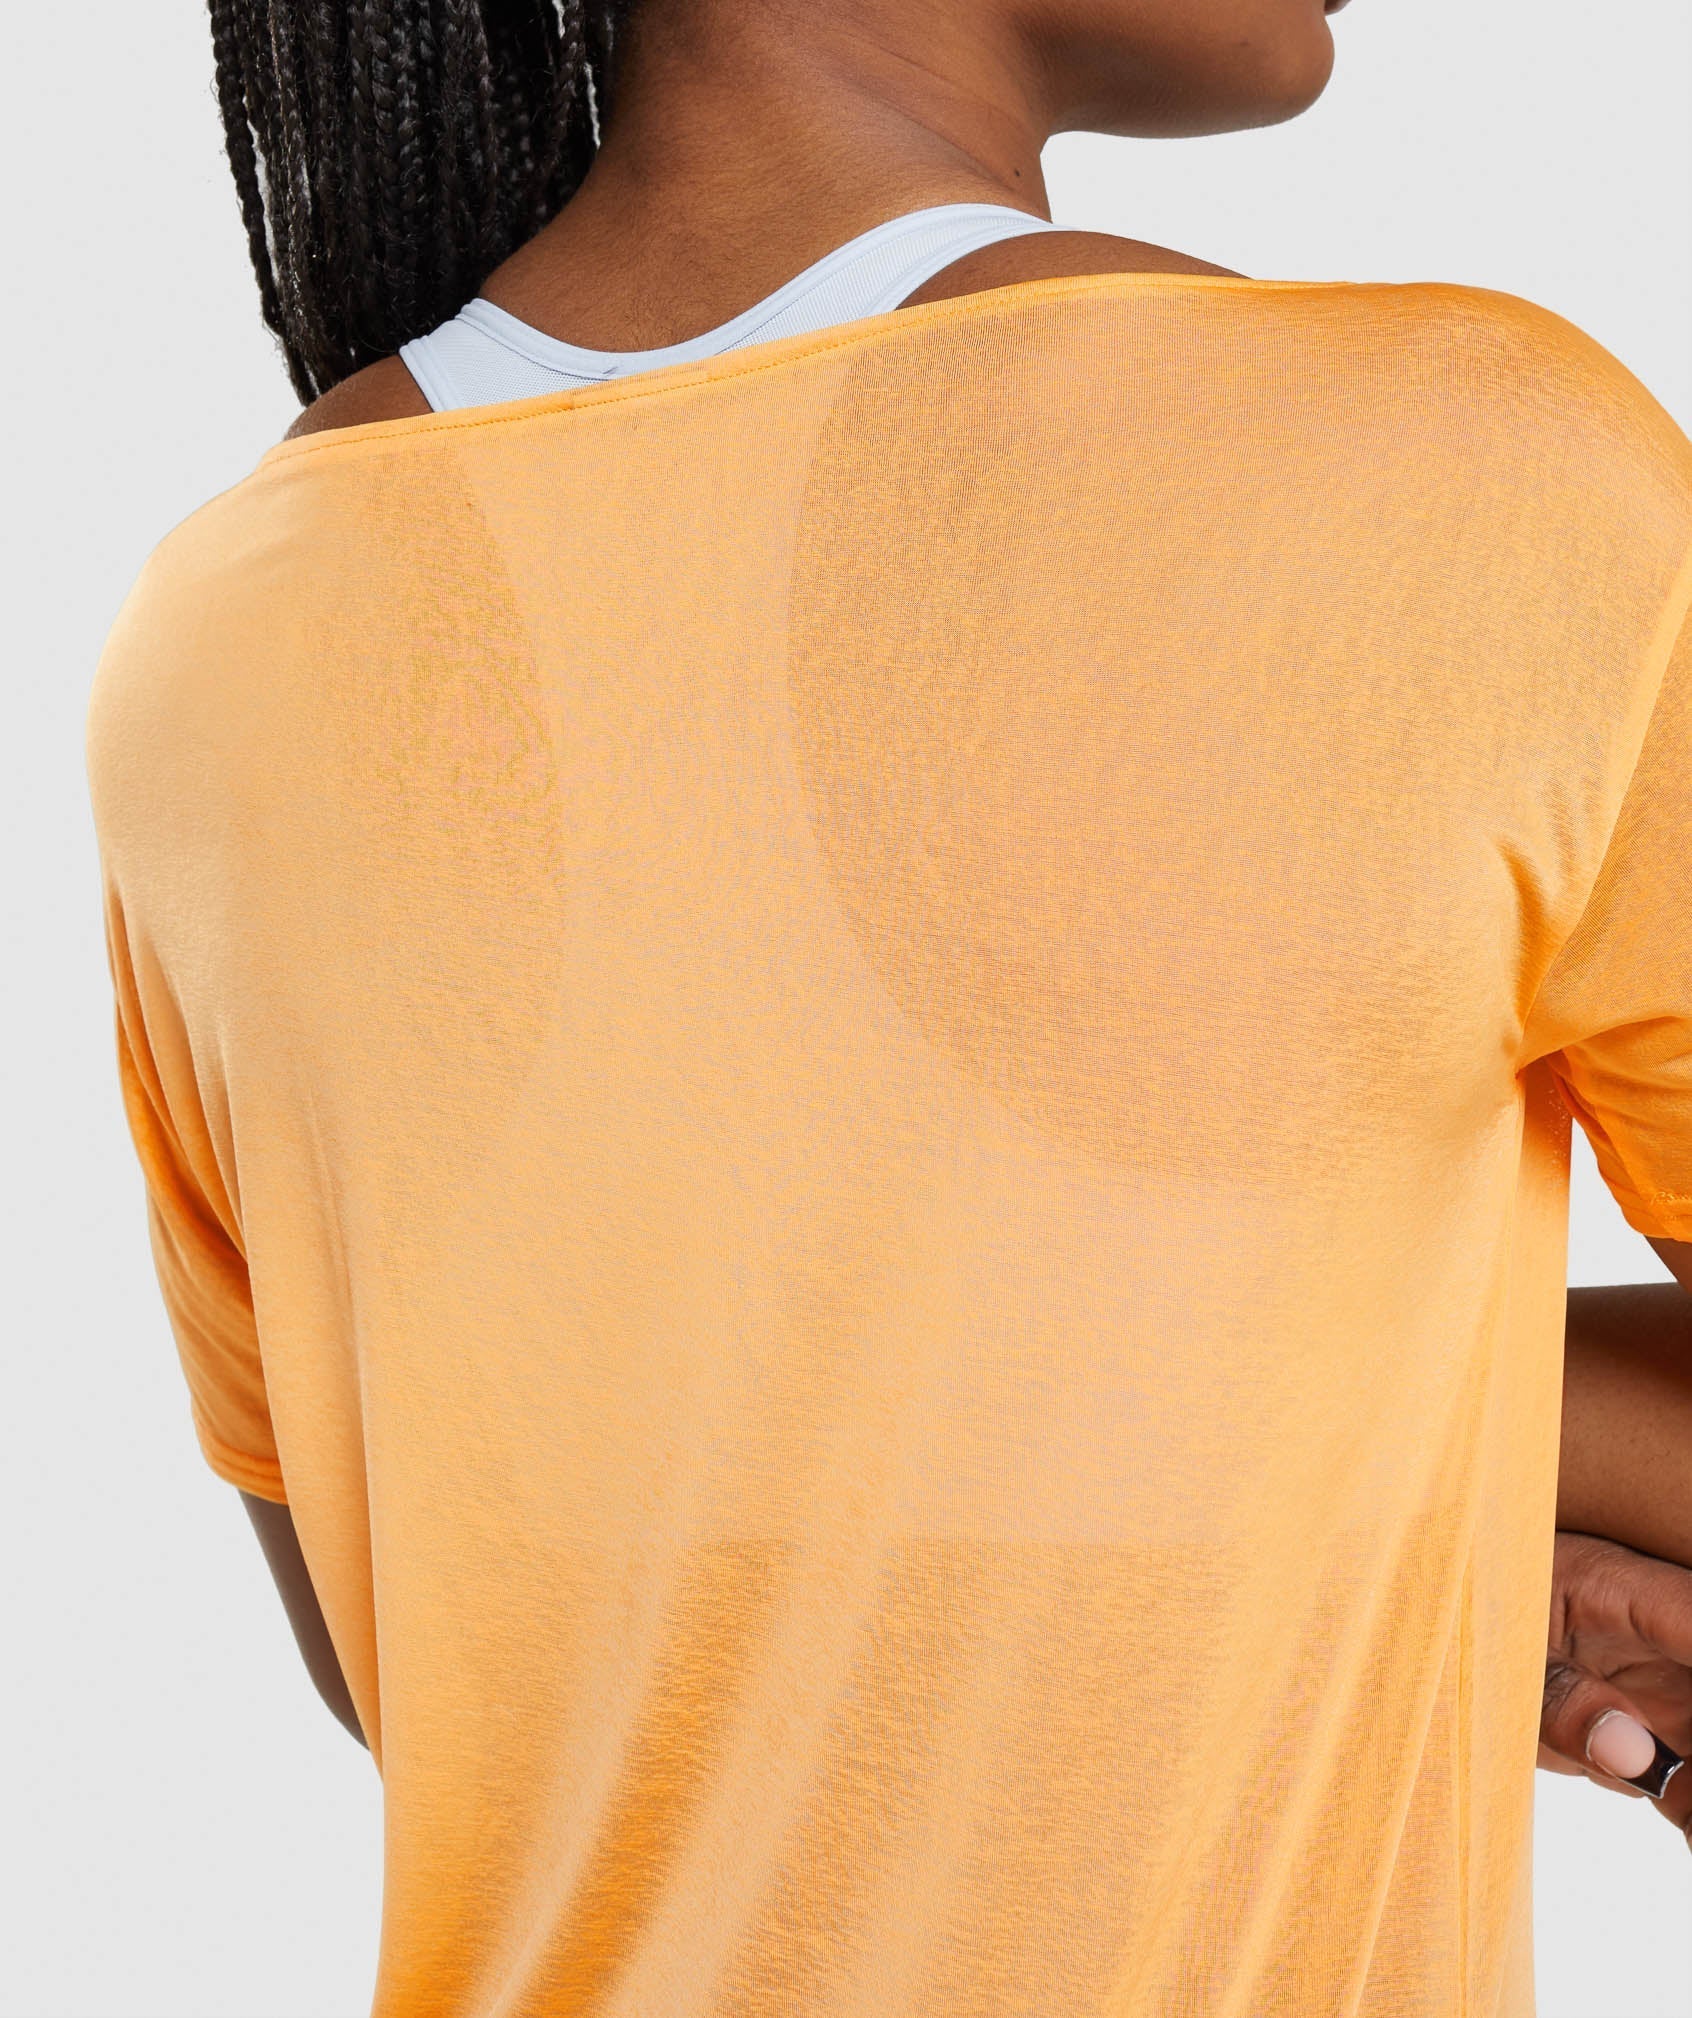 Training Oversized Top in Apricot Orange - view 5